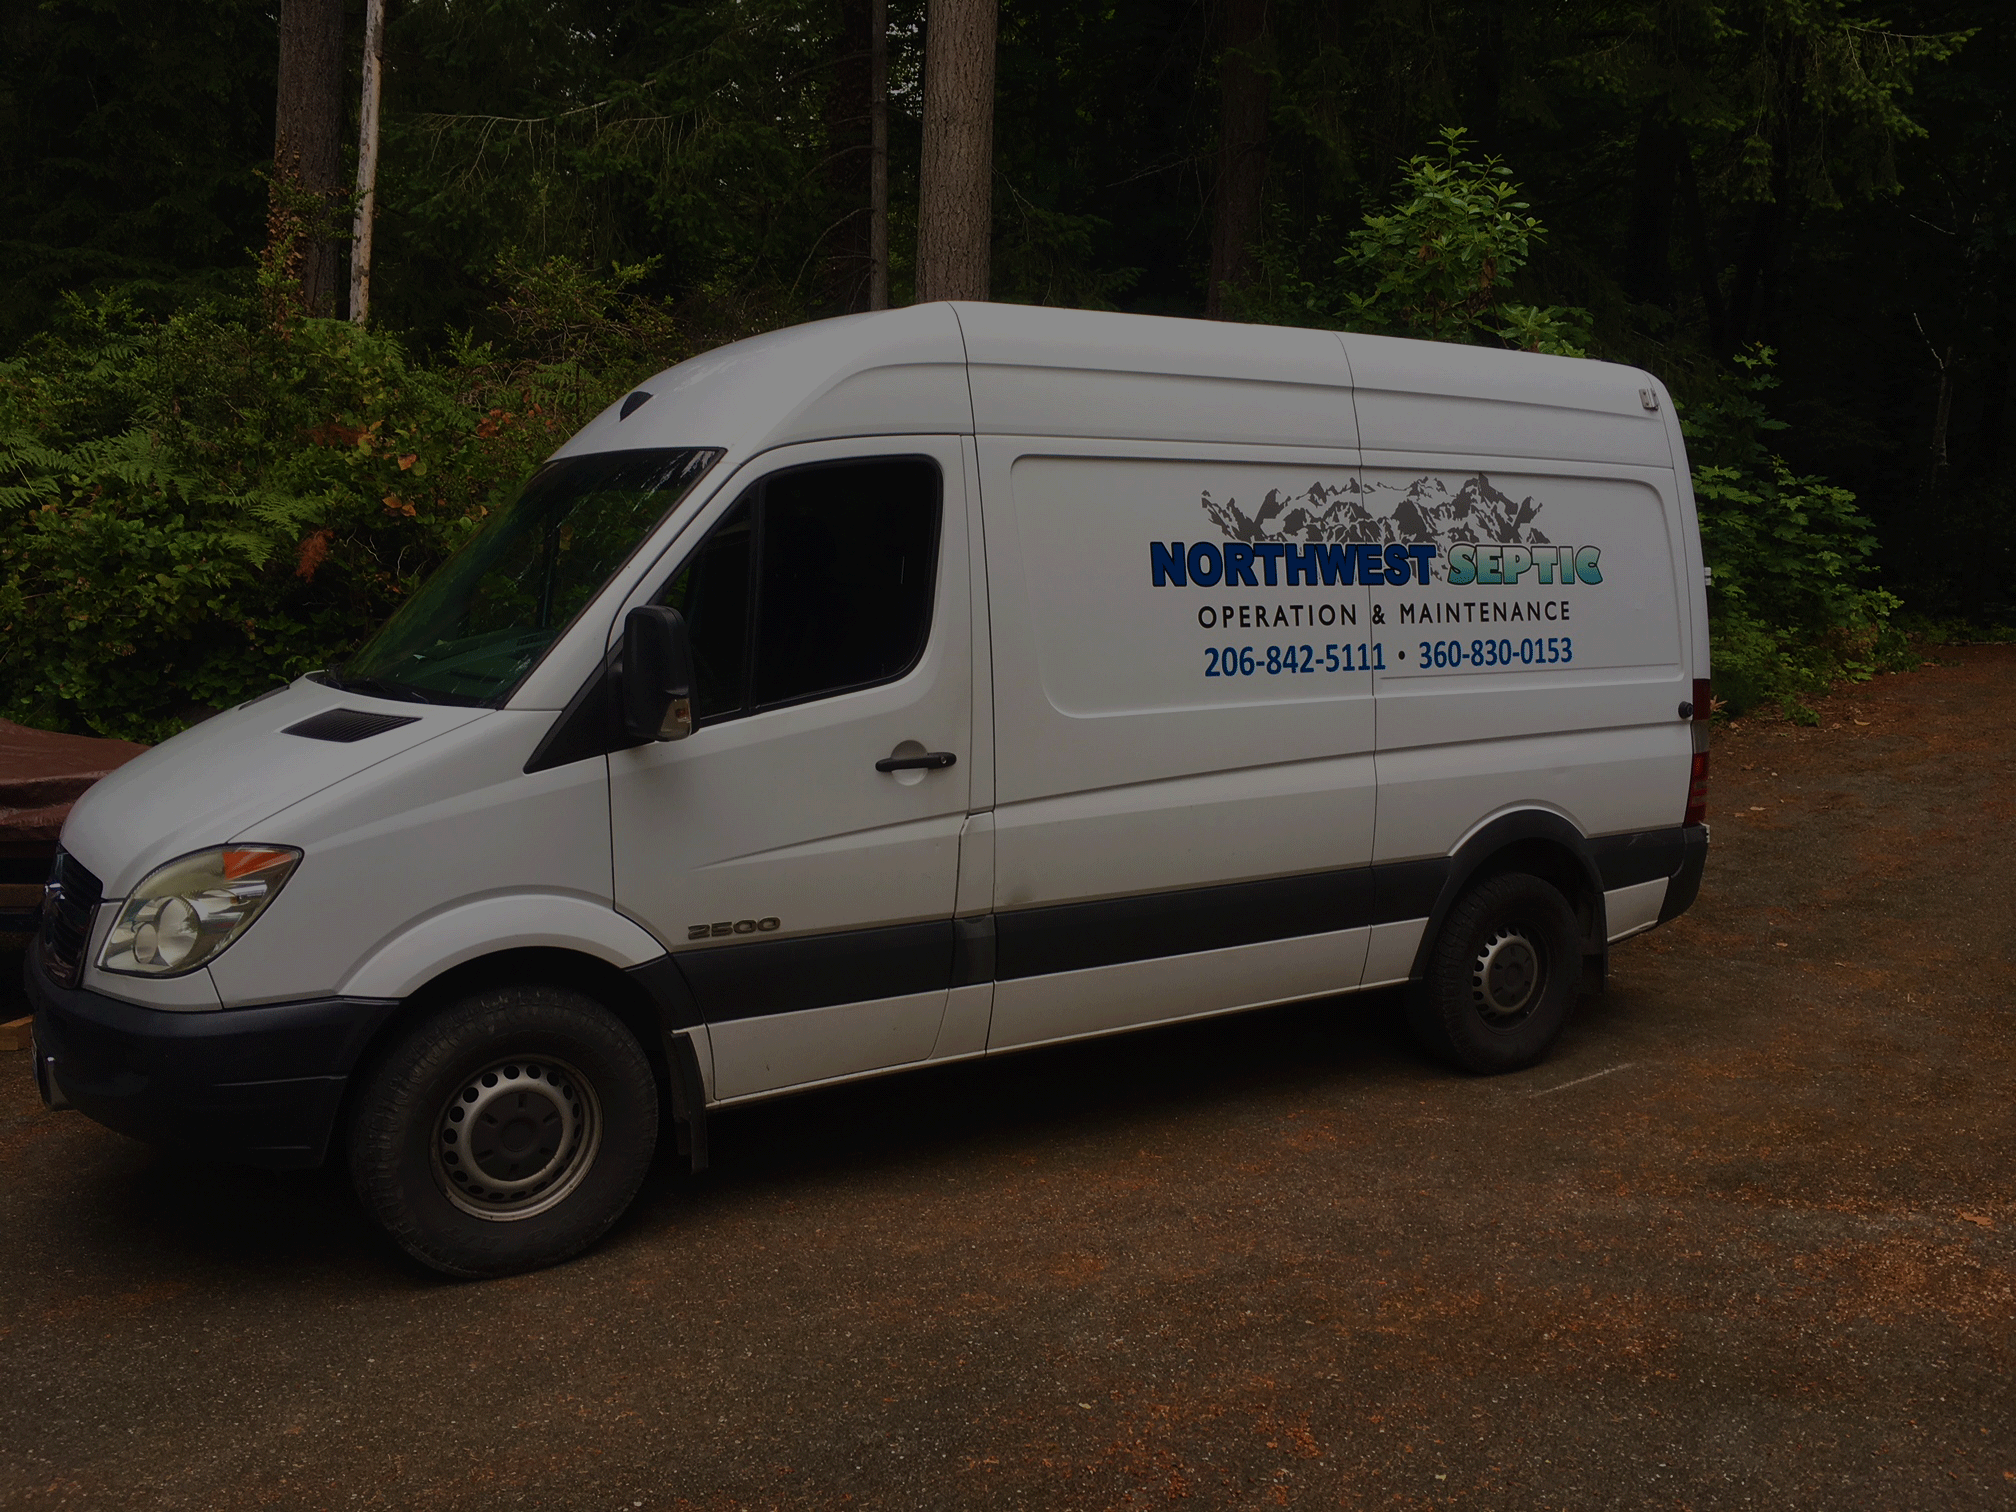 NorthWest Septic Service in Kitsap County